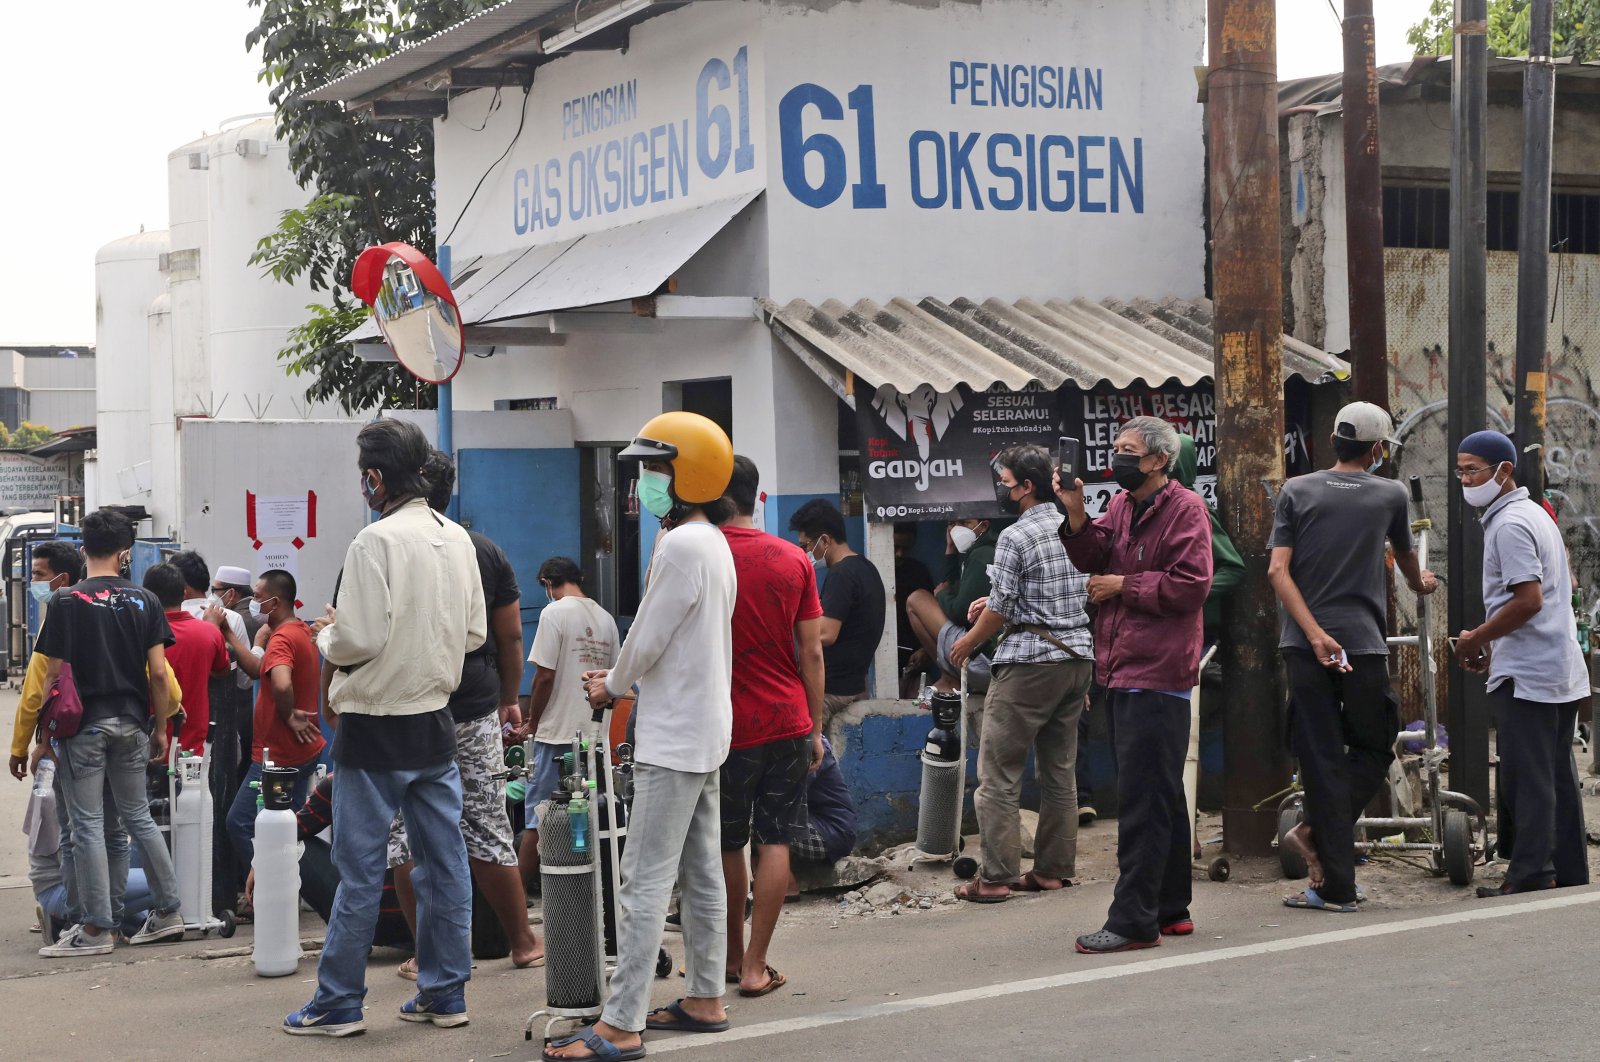 People wait for their turn to refill their oxygen tanks at a recharging station in Jakarta, Indonesia, Friday, July 9, 2021. (AP Photo)